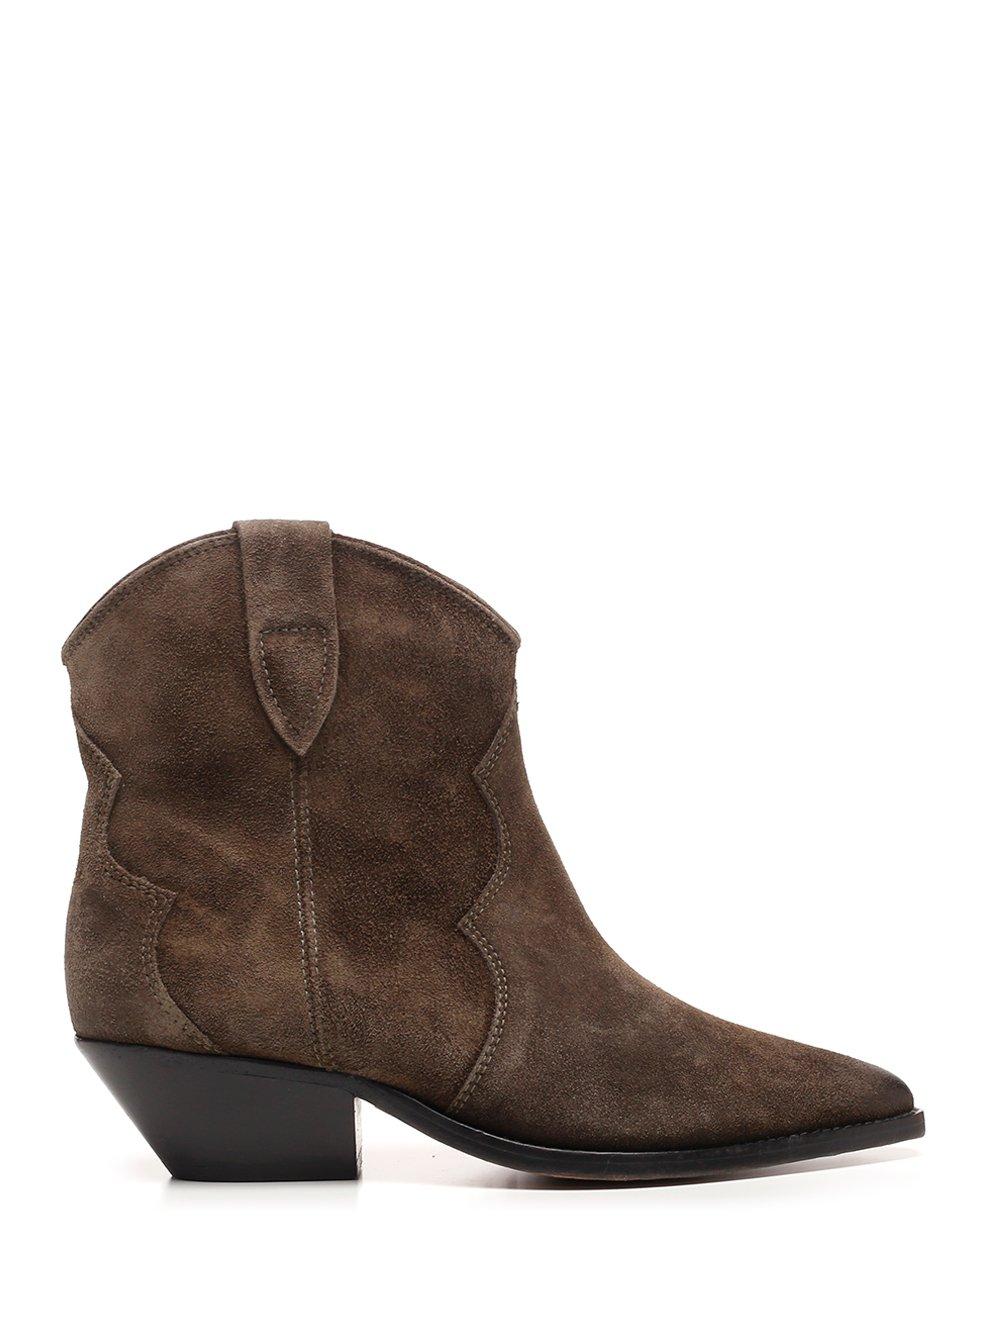 Isabel Marant Leather Dewina Cowboy Boots in Brown - Lyst